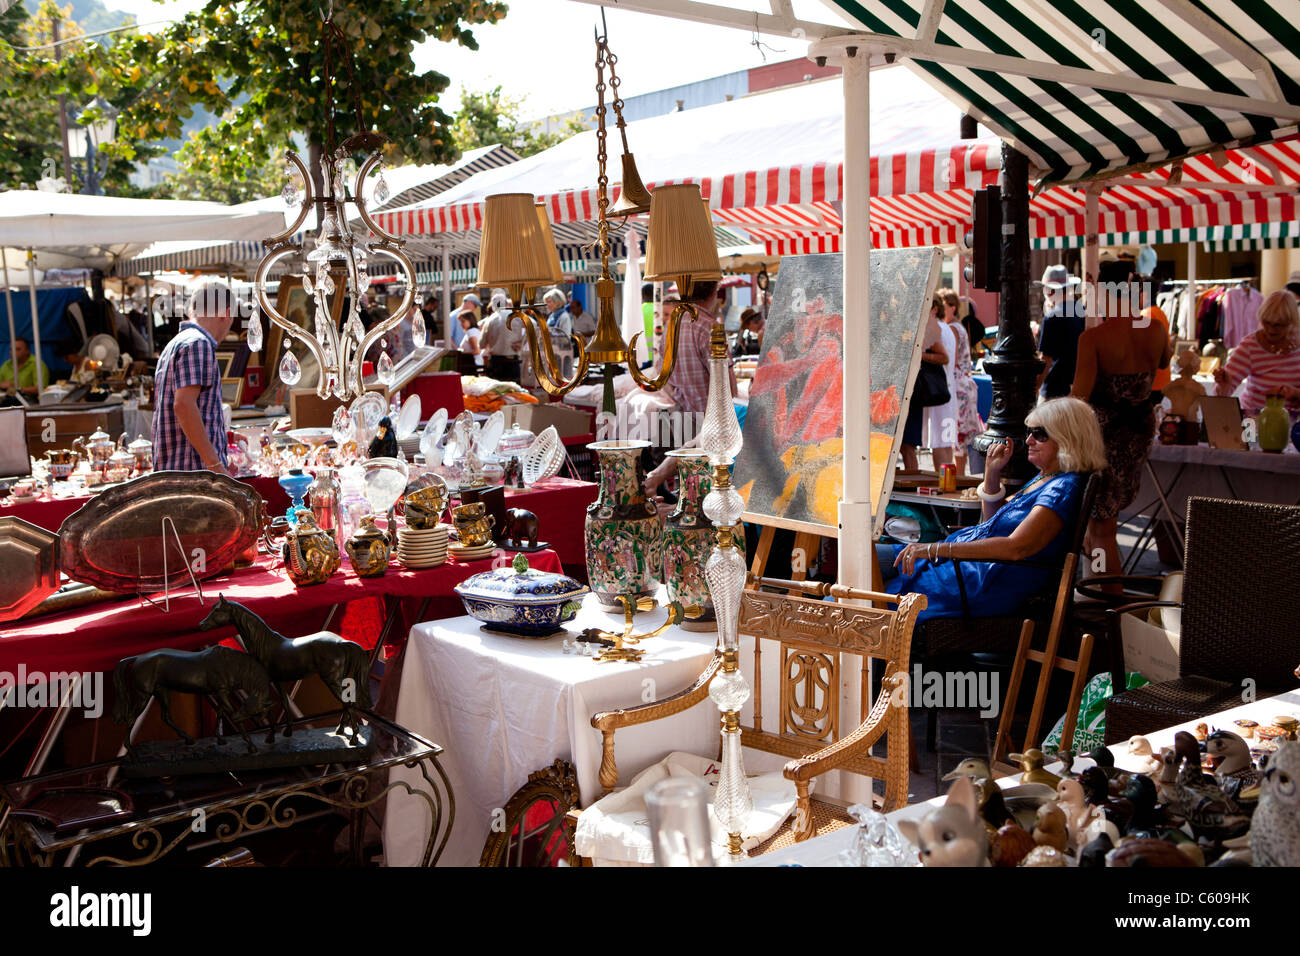 Antiques market, Cours Saleya, Nice, France Stock Photo